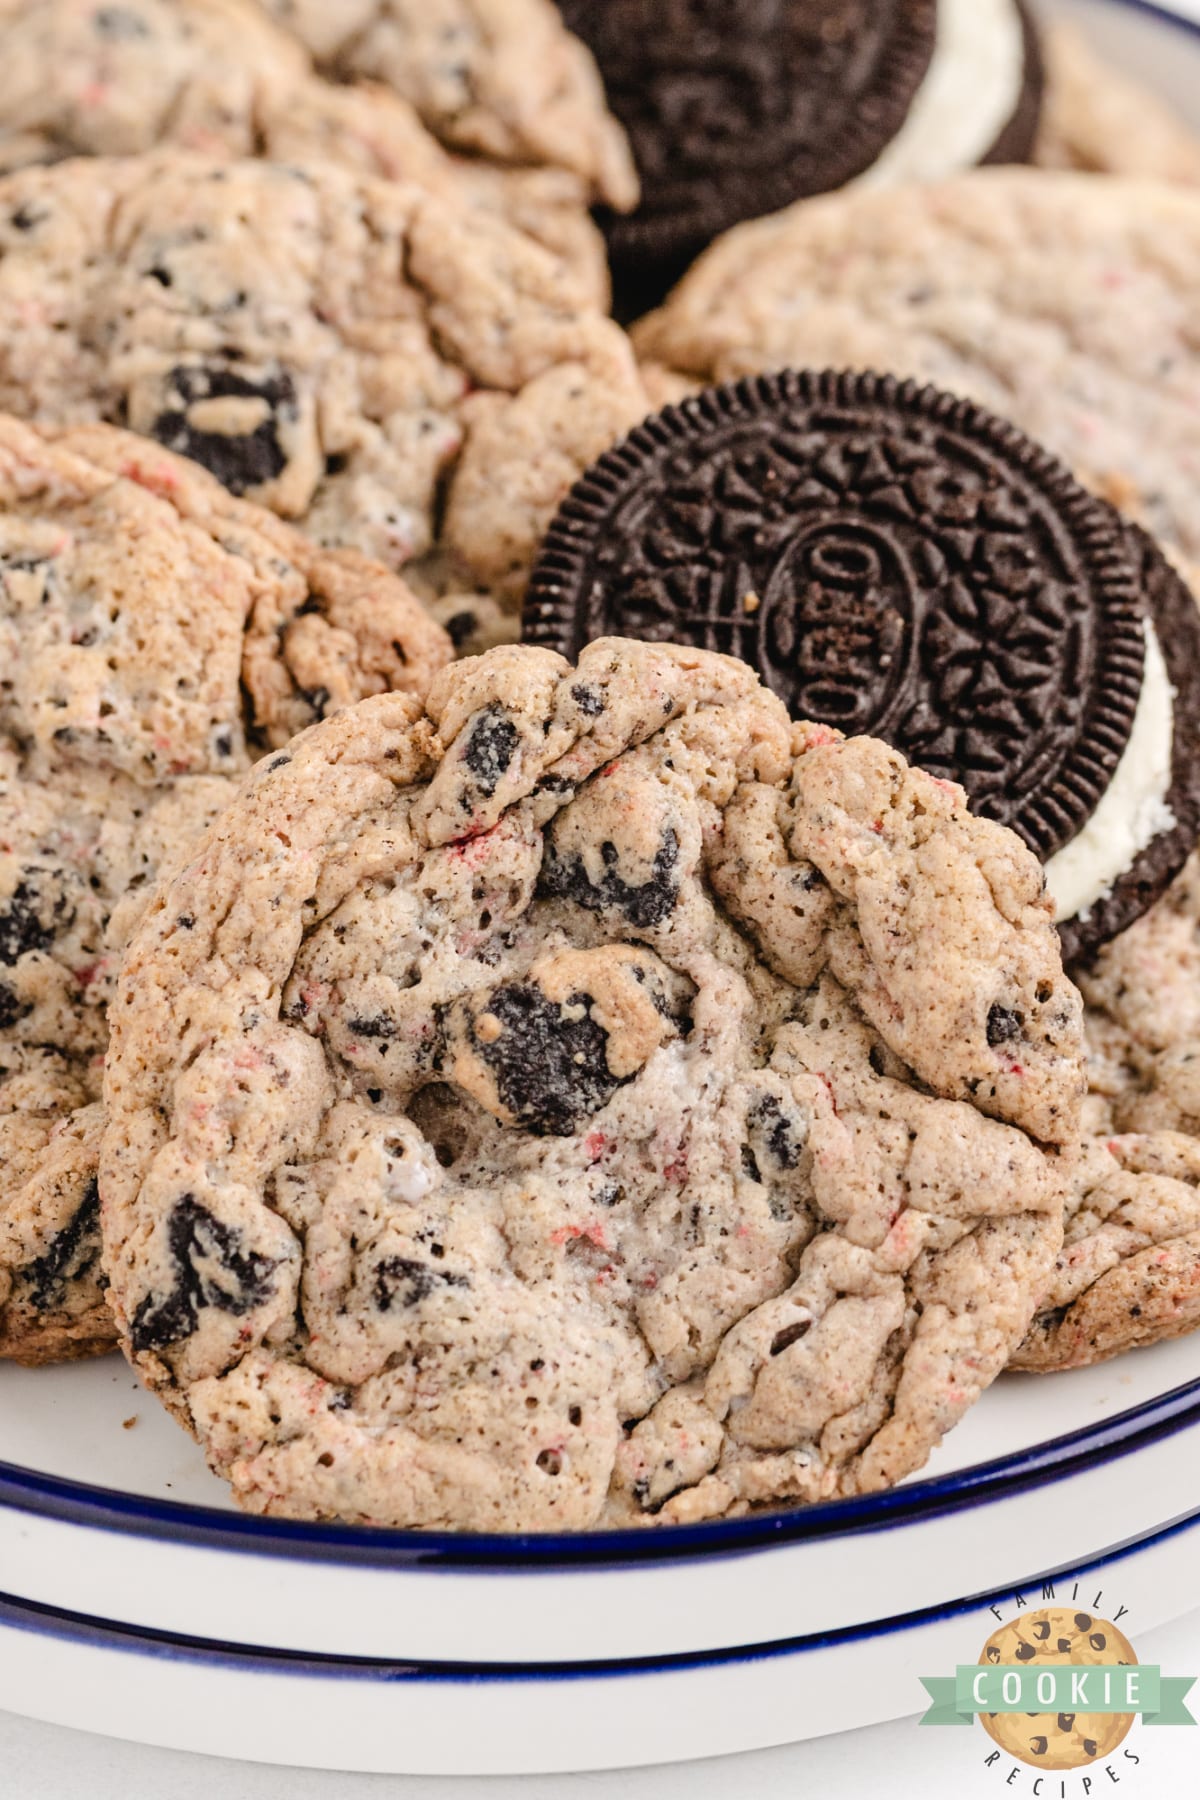 Peppermint Oreo Cookies are made with pudding mix, Oreo cookies, crushed candy canes and peppermint extract. This delicious peppermint cookie recipe yields a perfectly soft and chewy cookie that is sure to be a favorite holiday cookie!